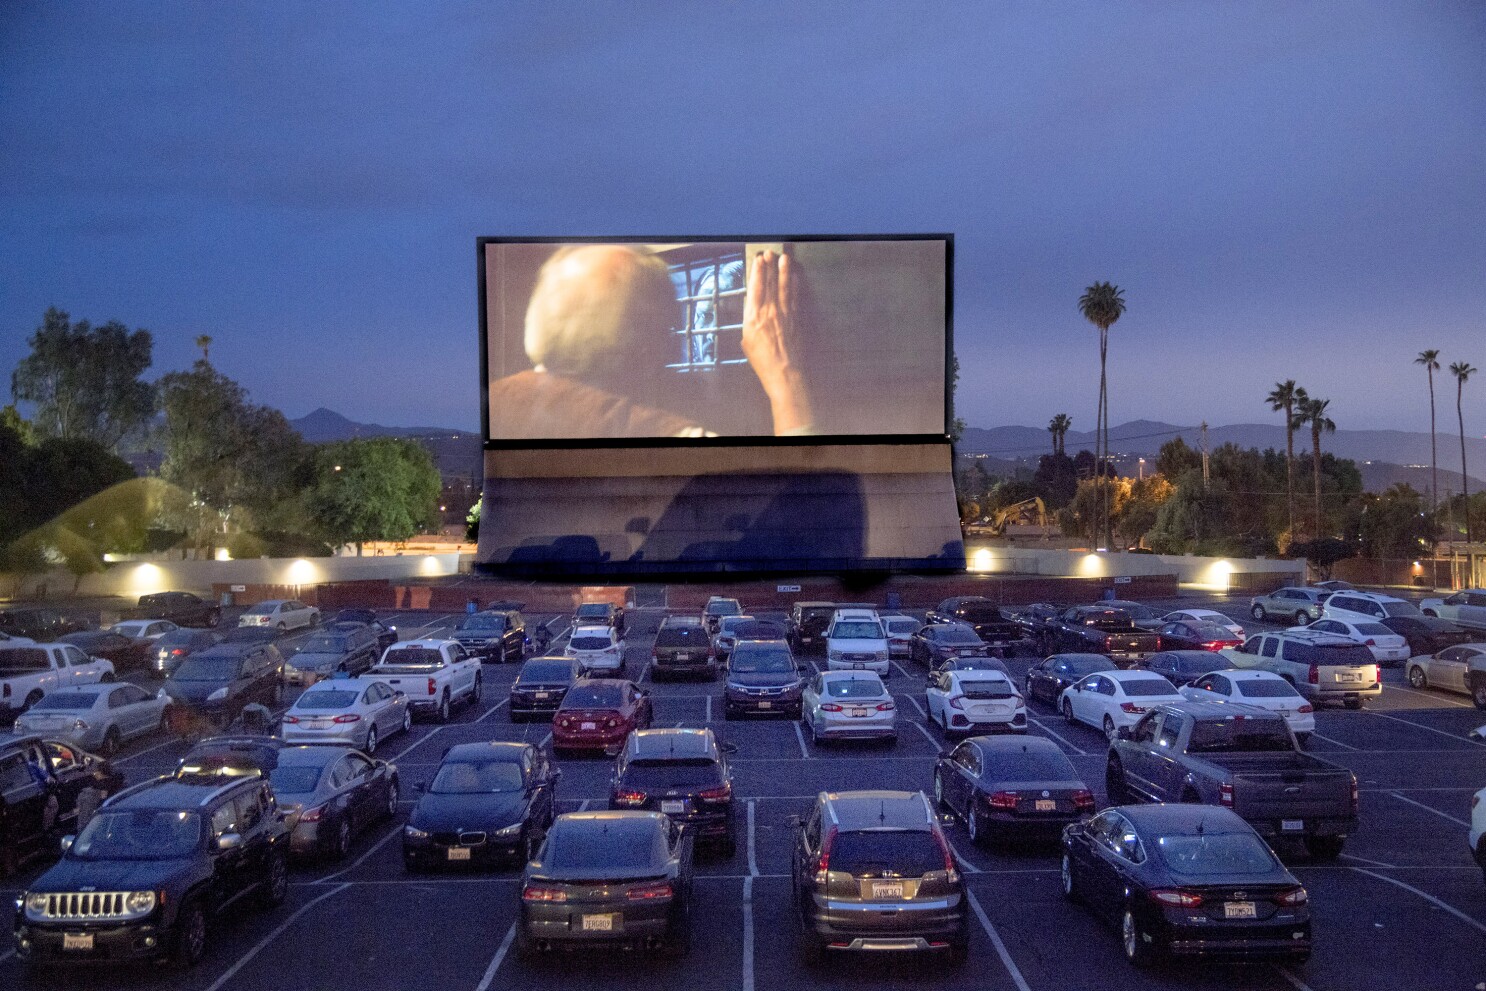 riverside drive thru movie theater with multiple cars parked in the drive thru lot staggered a large movie screen with movie playing with trees mountain and the city in the background and lights